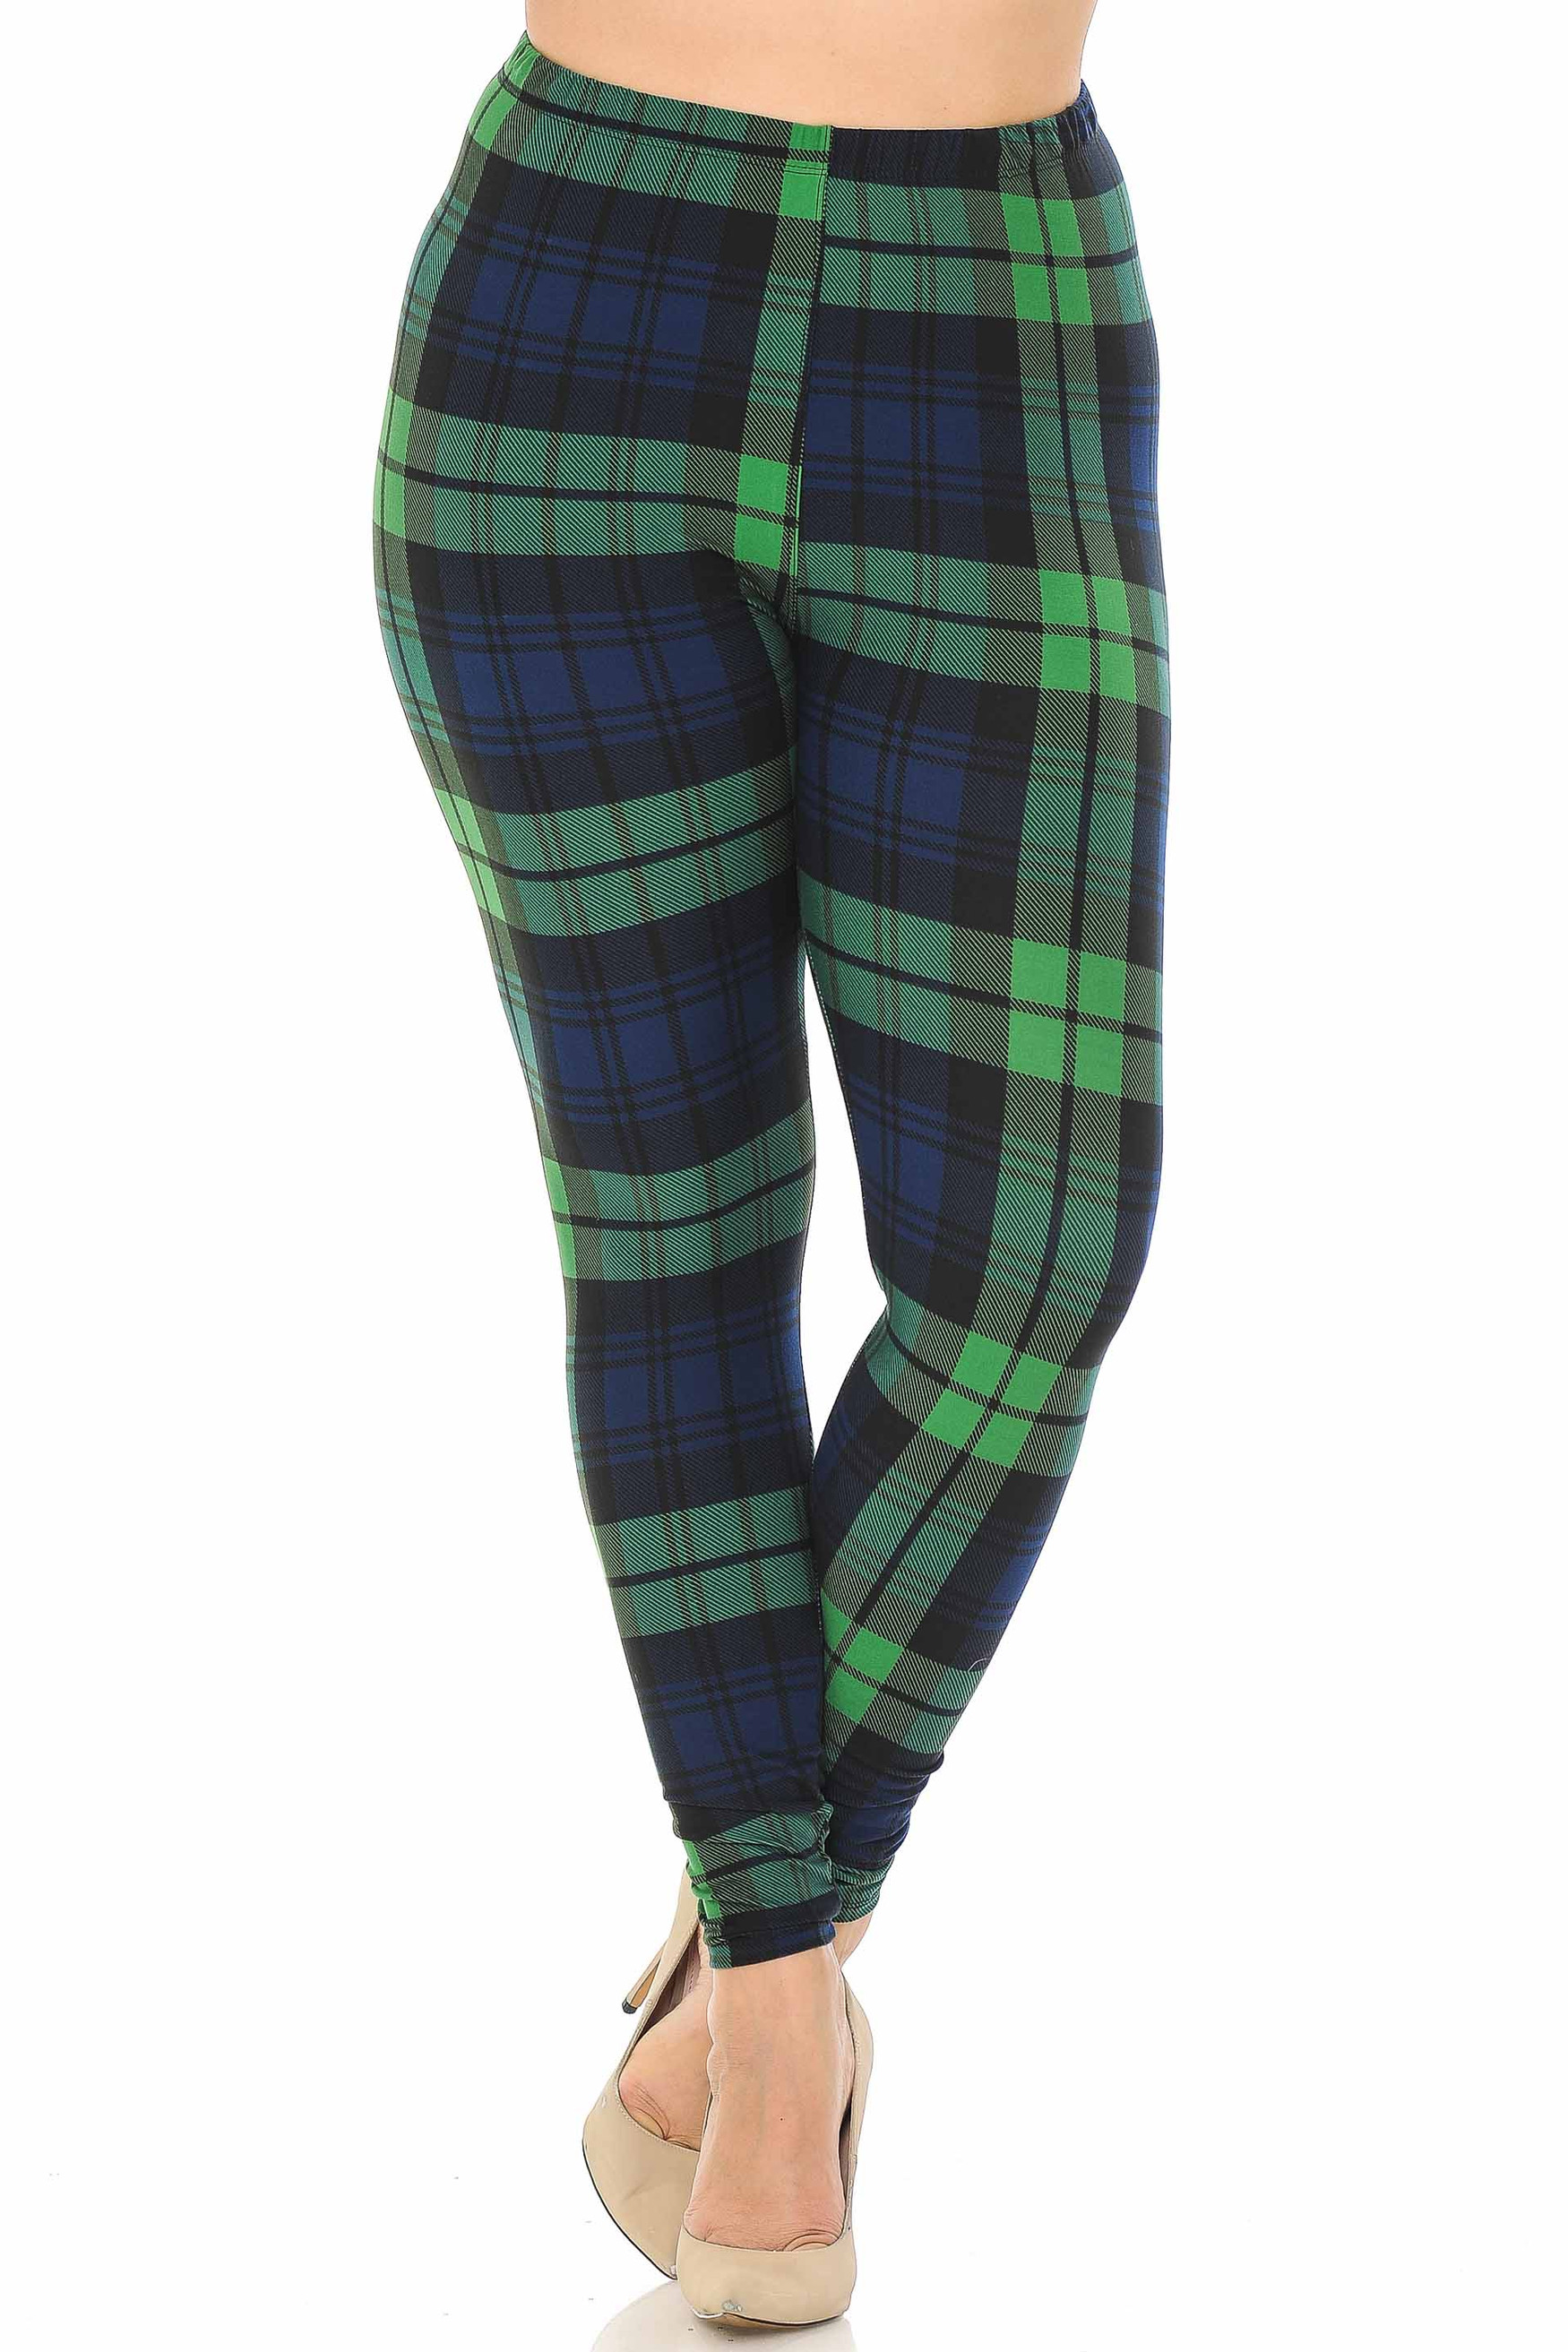 Buttery Soft Green Plaid Plus Size Leggings